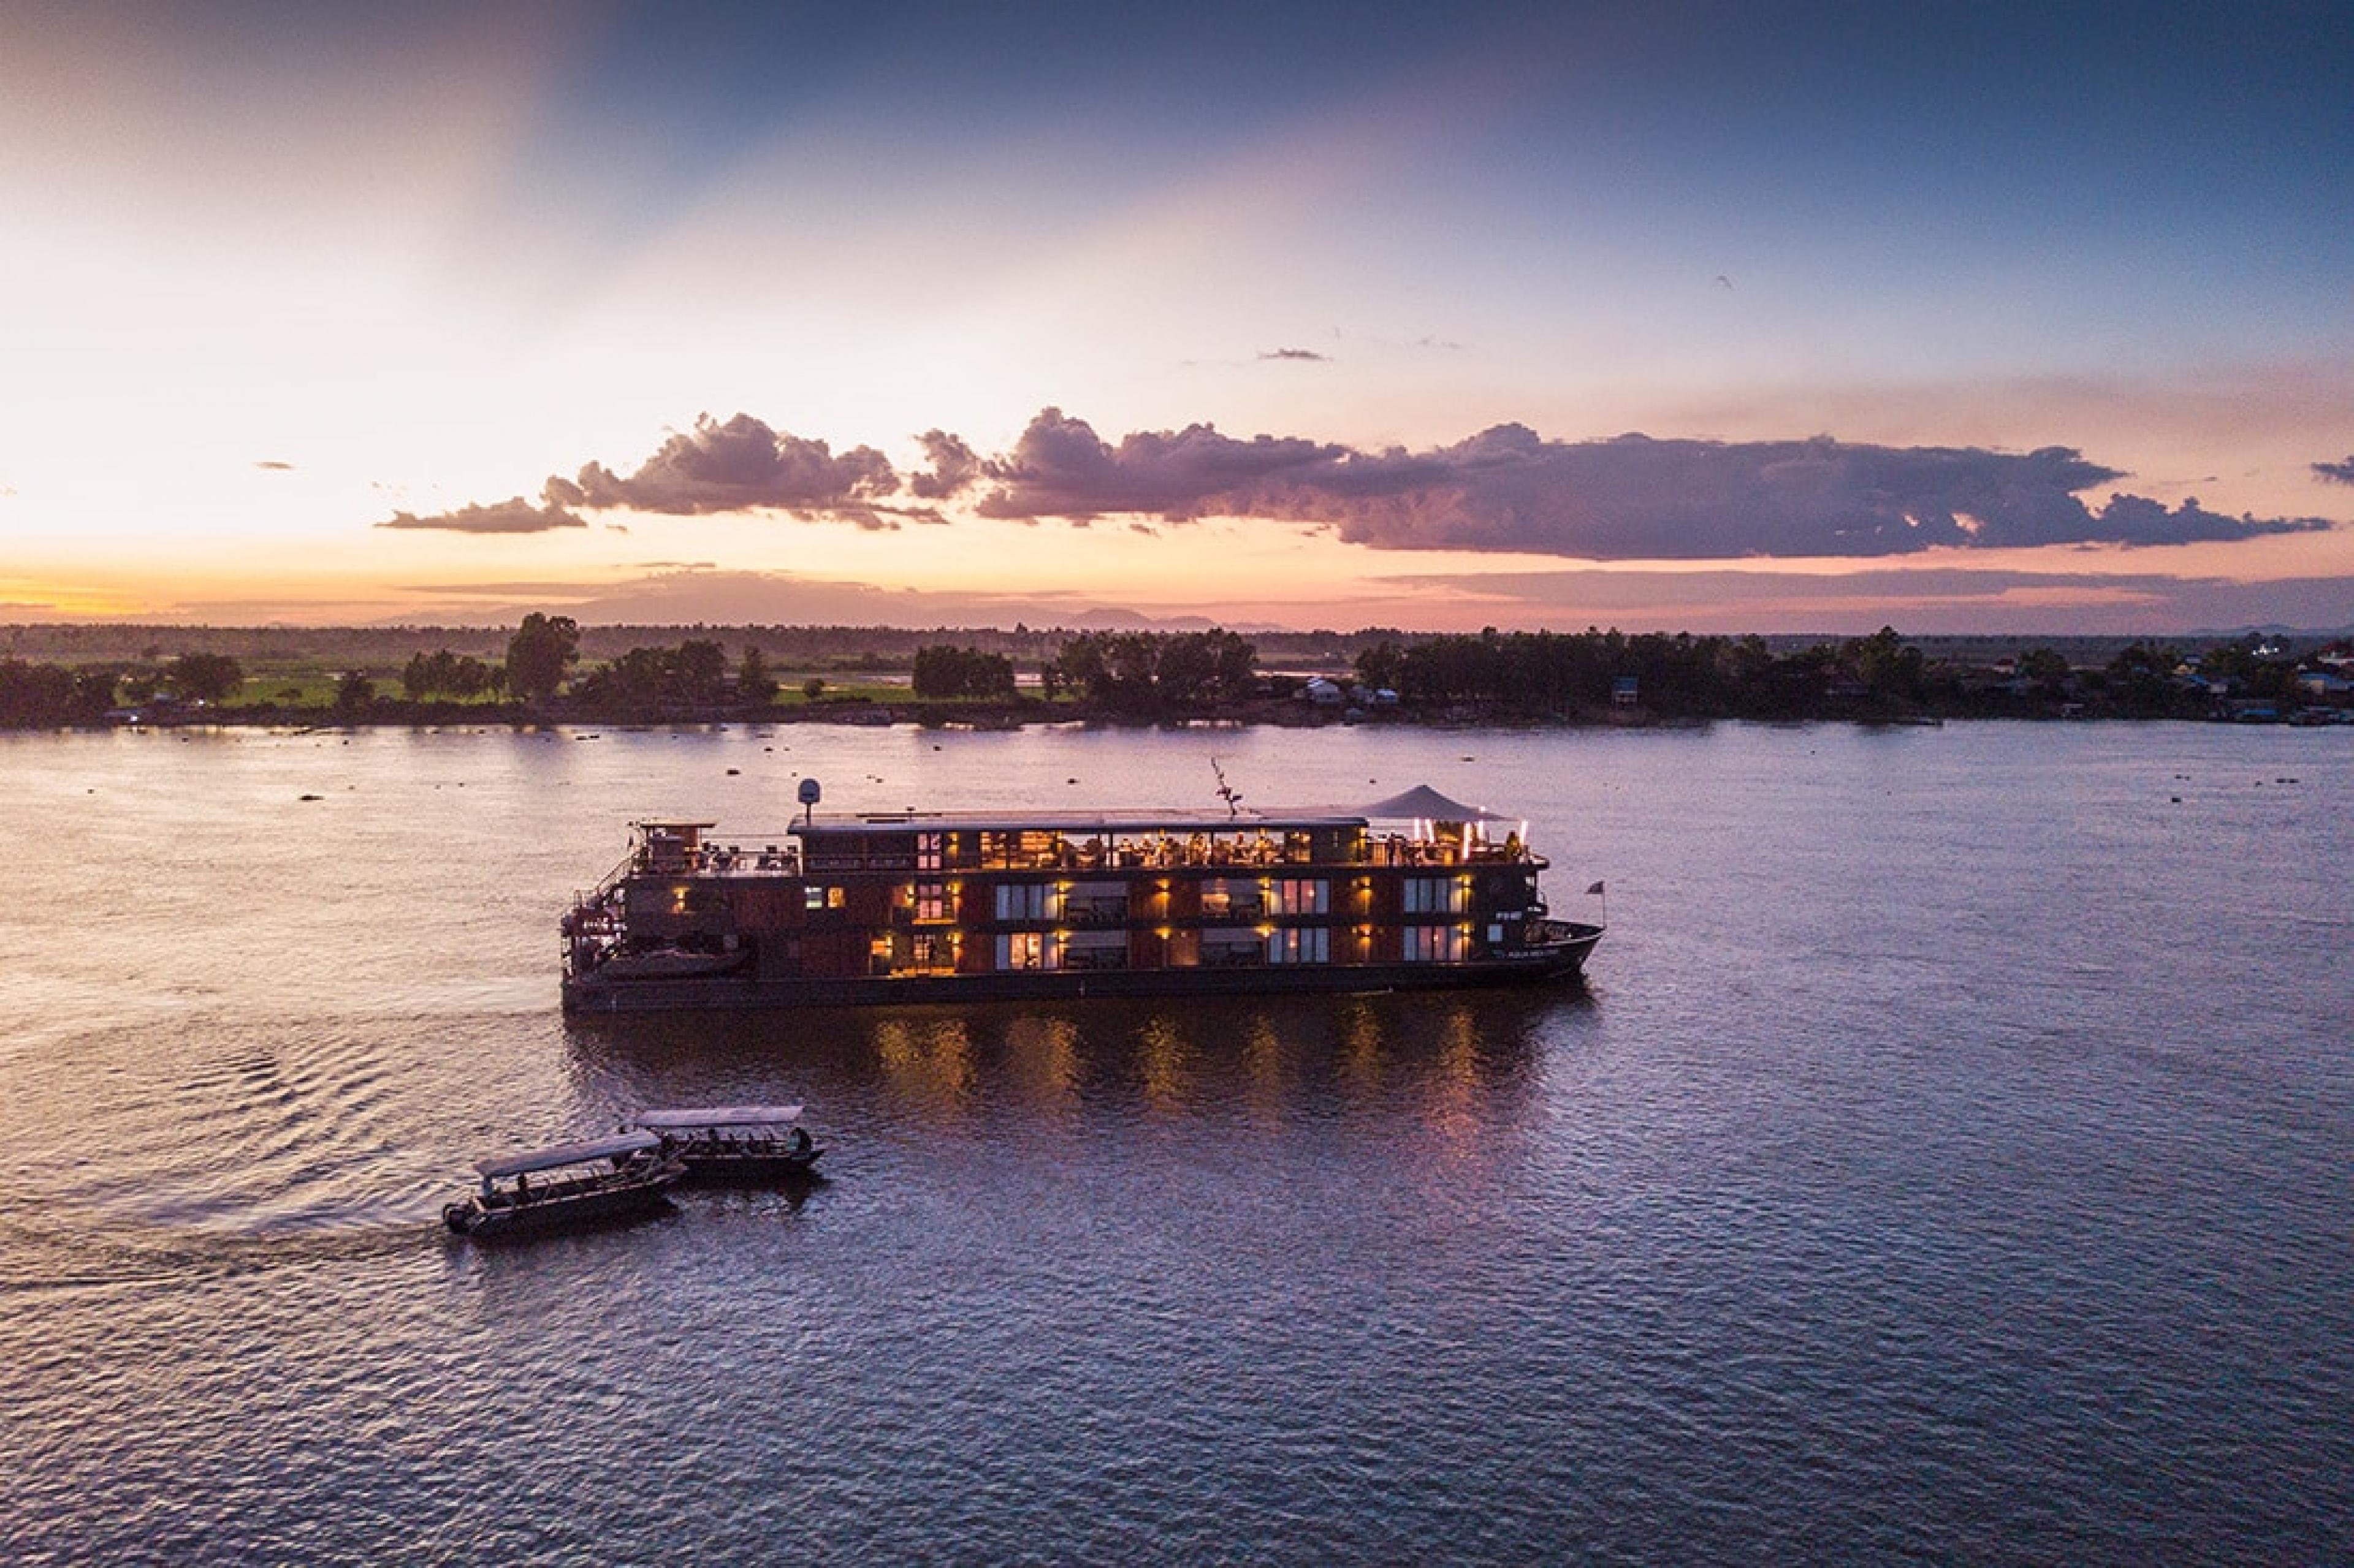 river cruise ship with three levels on Mekong River